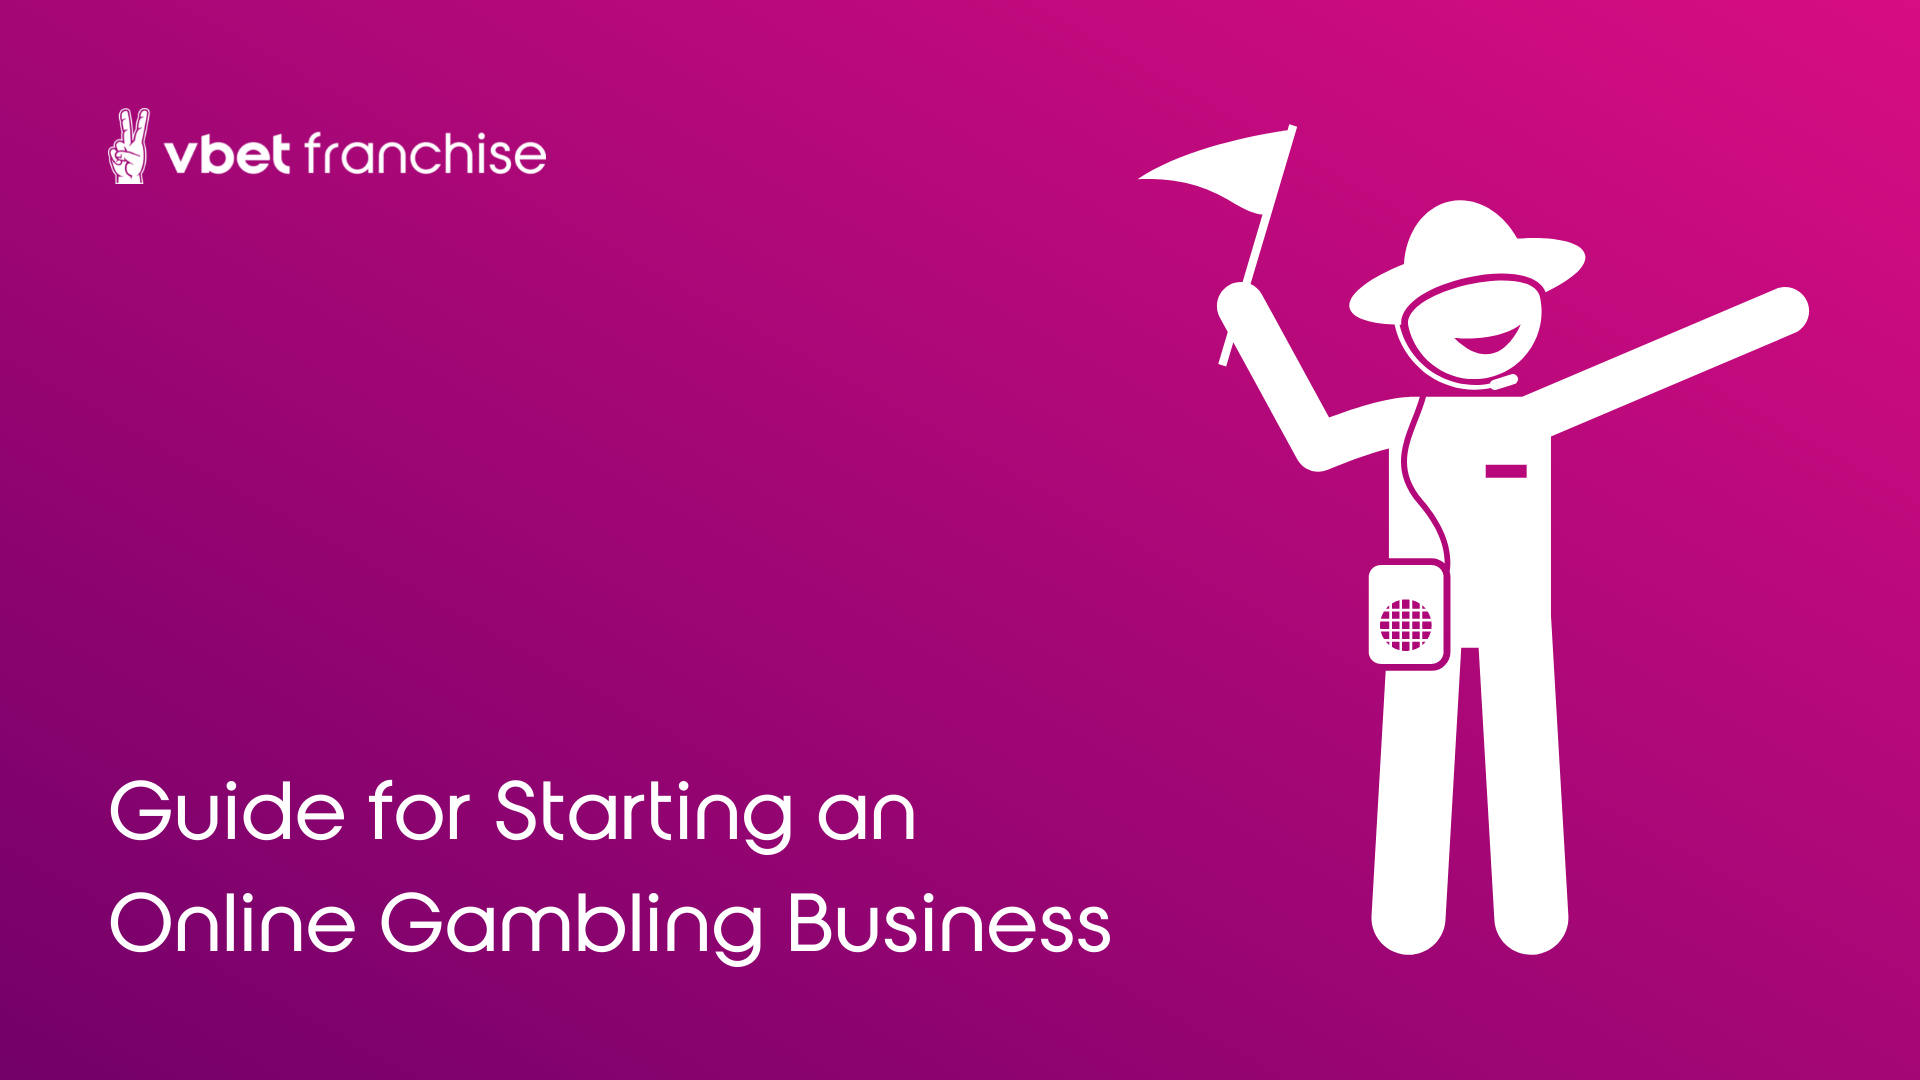 Guide for Starting an Online Gambling Business